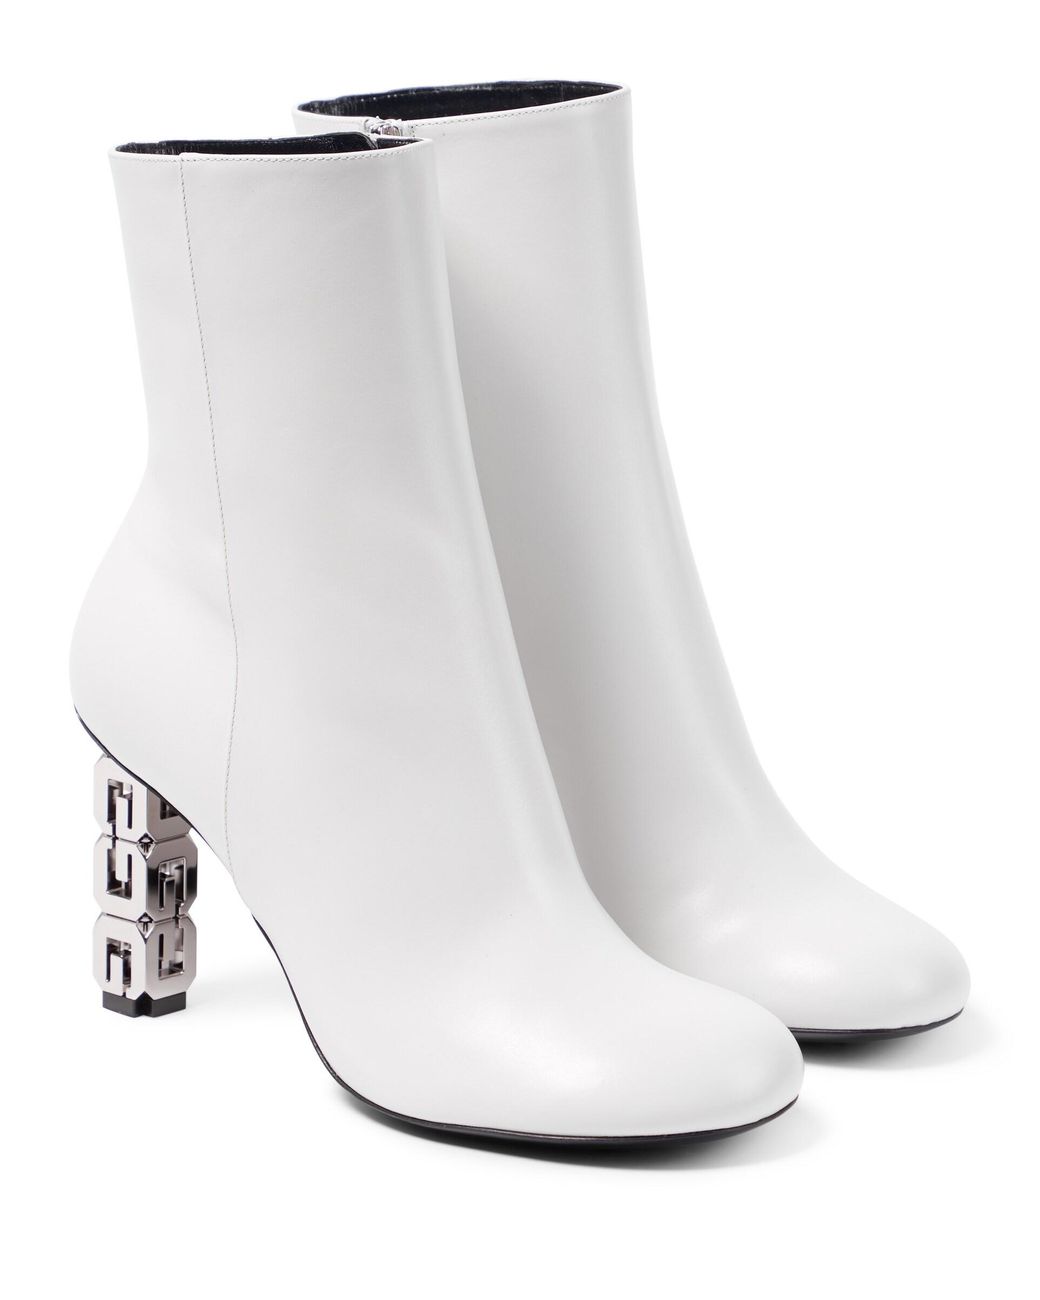 Givenchy G Cube Leather Ankle Boots in Ivory (White) | Lyst